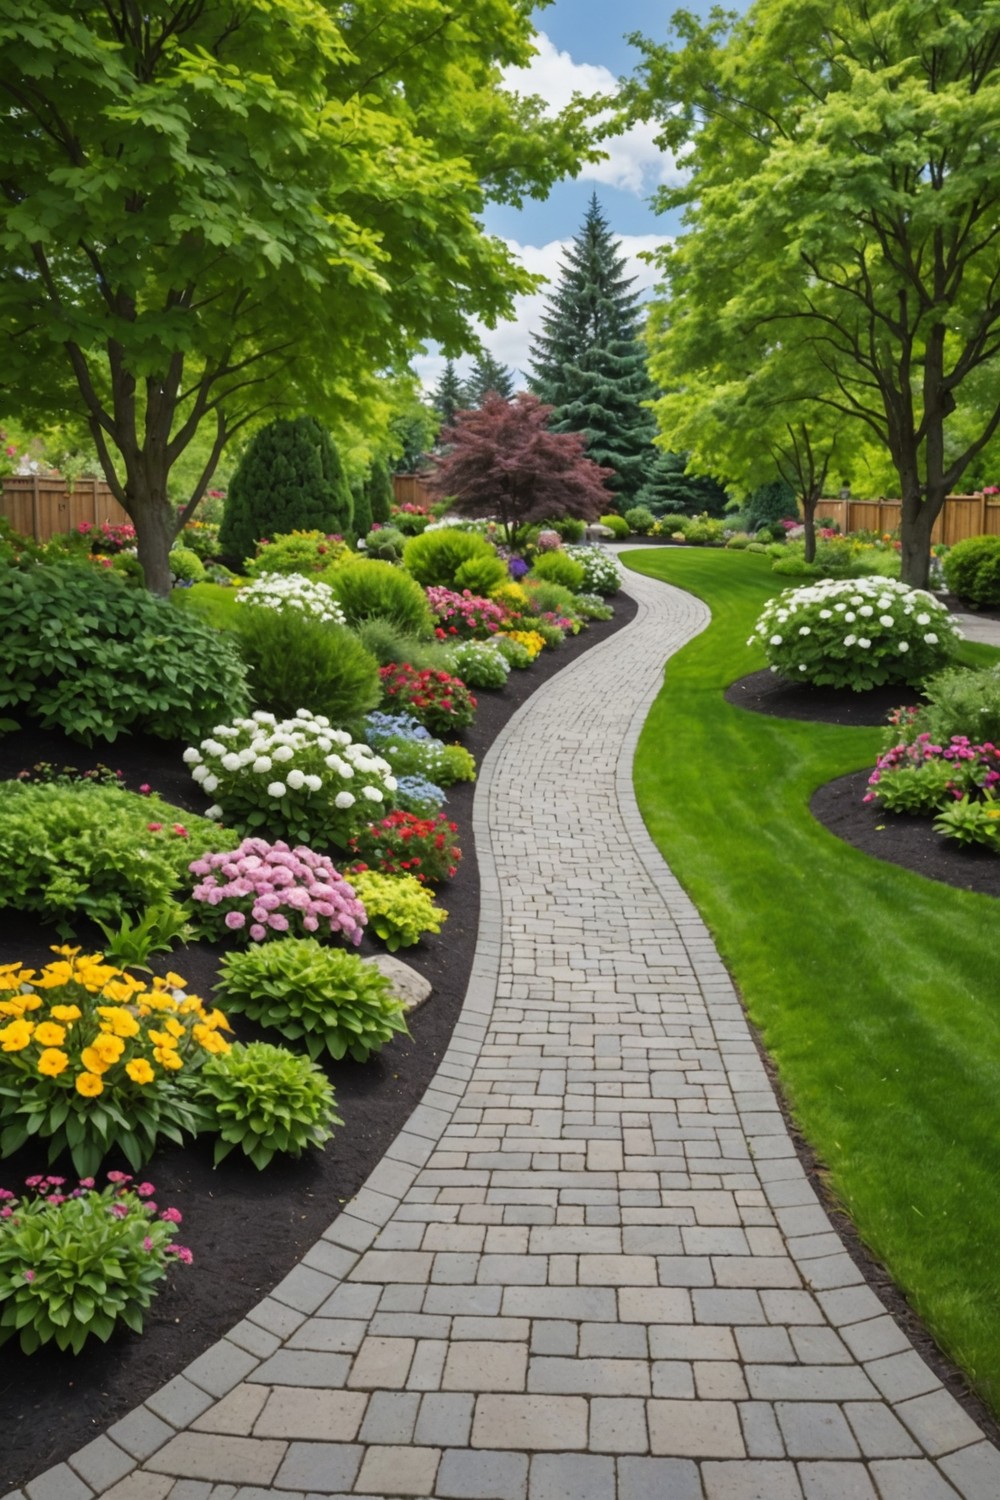 Interlocking Paver Retaining Wall with Built-in Planters